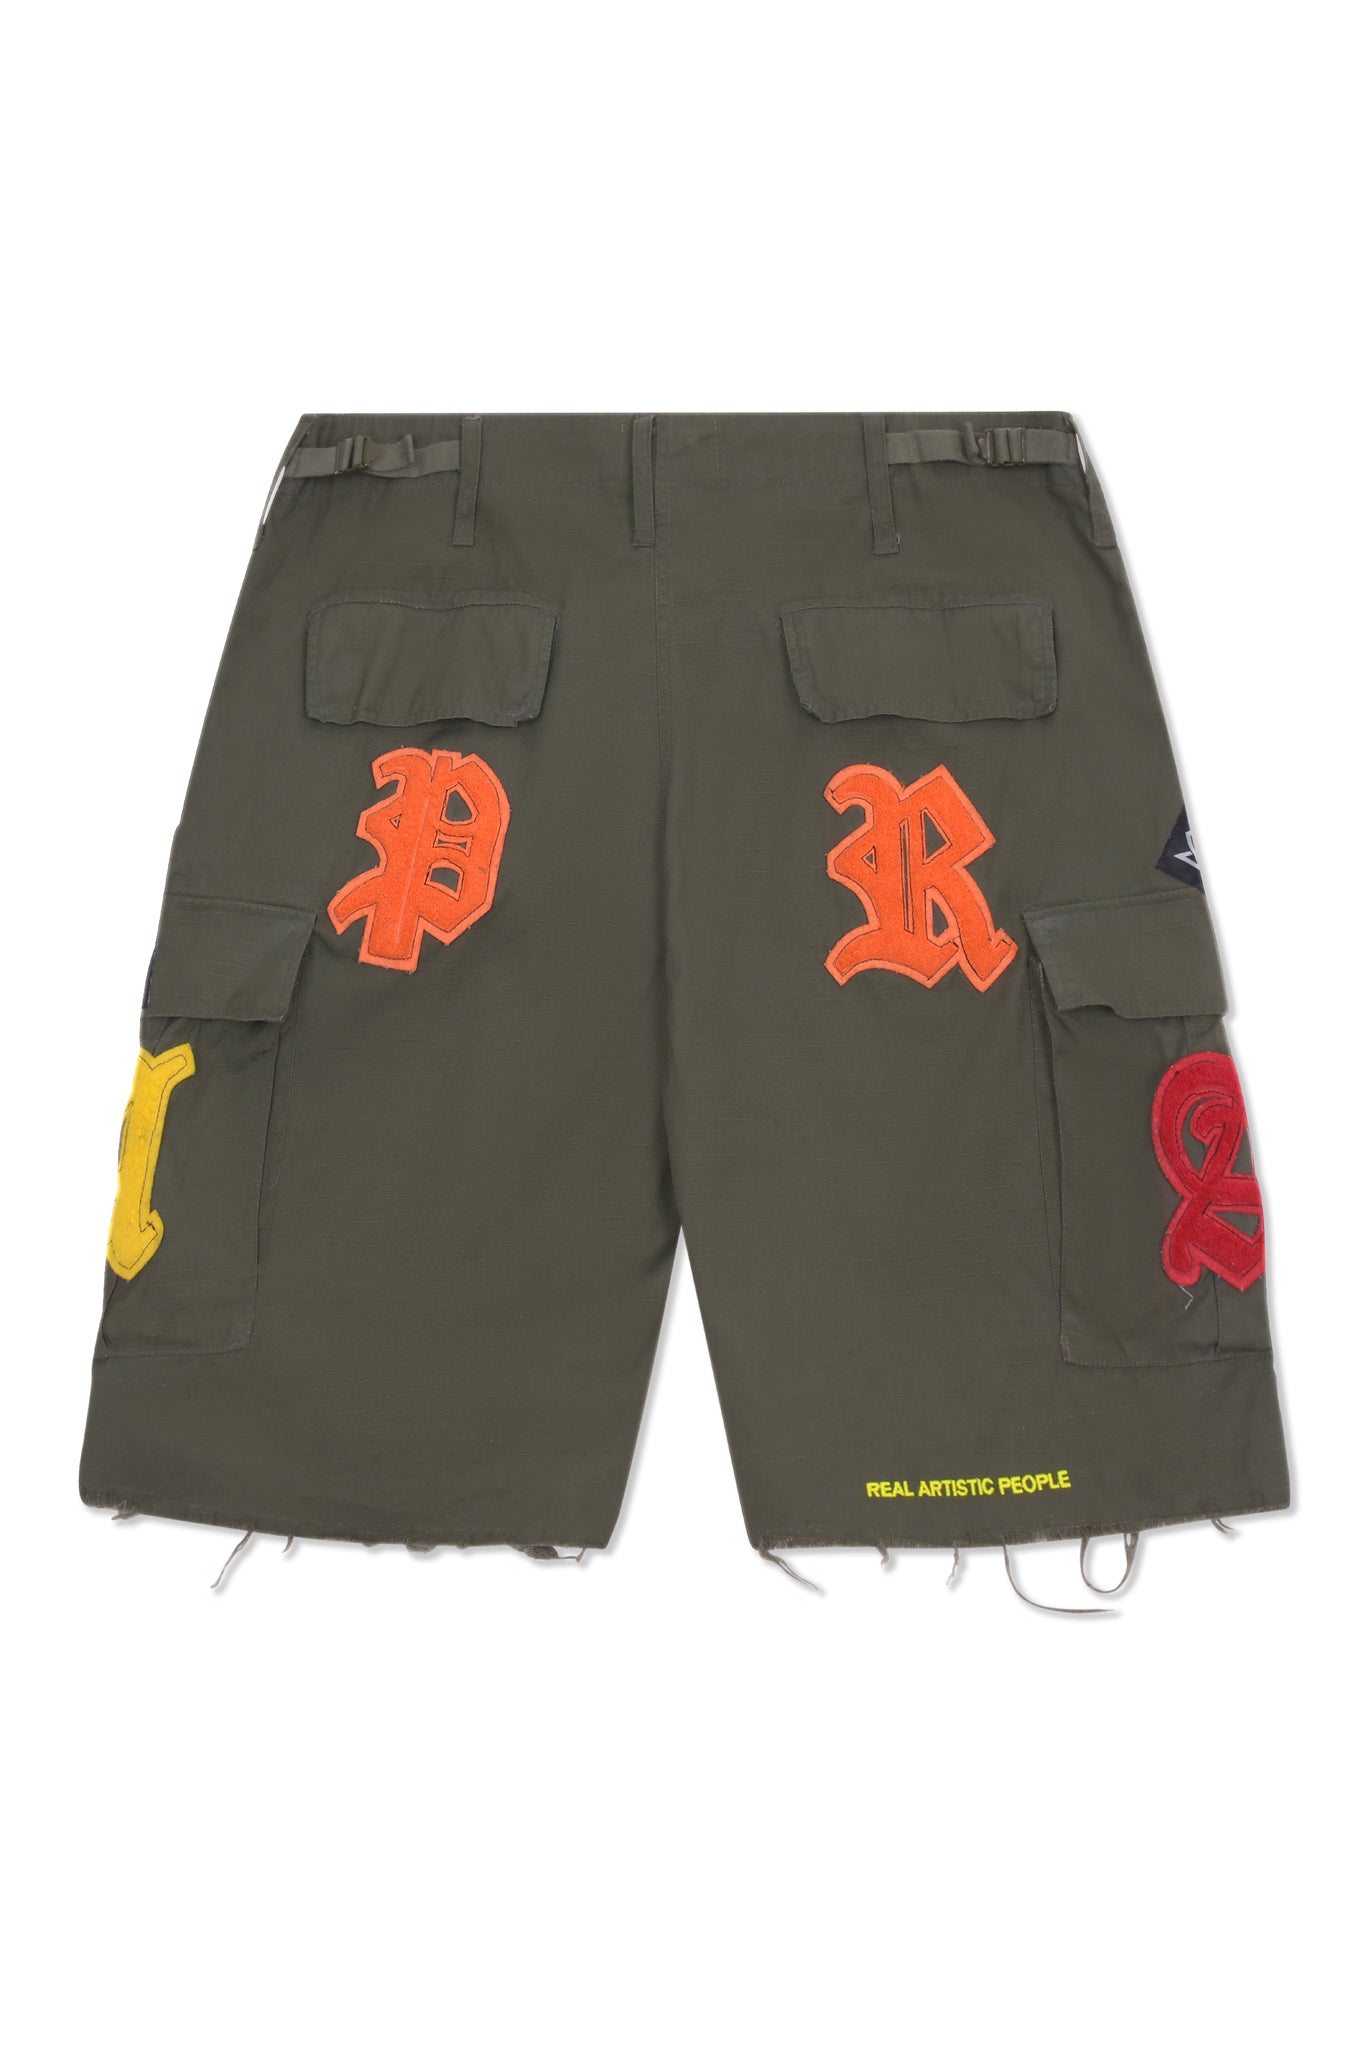 Real Artistic People - Cargo Shorts Green